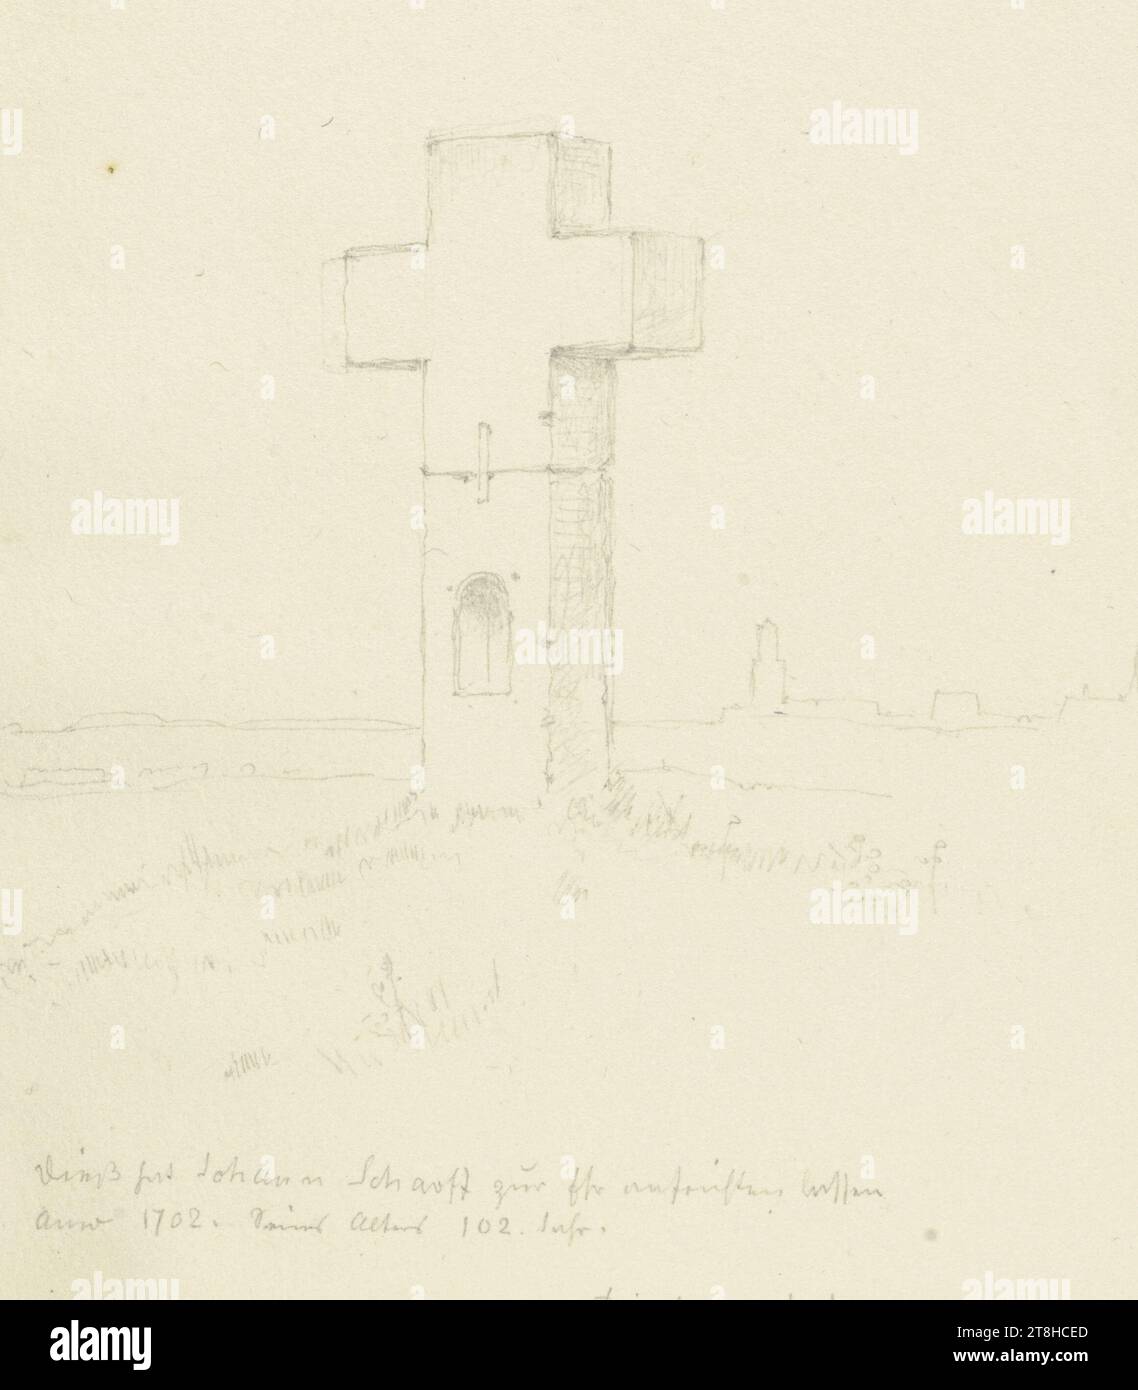 CARL THEODOR REIFFENSTEIN, Stone corridor cross near Friedberg, July 12, 1879, sheet, 151 x 117 mm, pencil on paper, Stone corridor cross near Friedberg, CARL THEODOR REIFFENSTEIN, page, adhesive tapes, volume 36, page 9, part number / total, 2 / 2, FRIEDBERG, HESSEN, circle, 19th CENTURY, DRAWING, pencil on paper, GRAPHITE-CLAY MIXTURE, PAPER, PENCIL DRAWING, GERMAN, STUDY AFTER A SCULPTURAL WORK, LANDSCAPE STUDY, TRAVEL STUDY, Dated and inscribed lower right, in pencil, Friedberg July 12, 1879; Inscribed lower left: Johann Scharff had this erected in honor / Anno 1702. 102nd year of his age Stock Photo